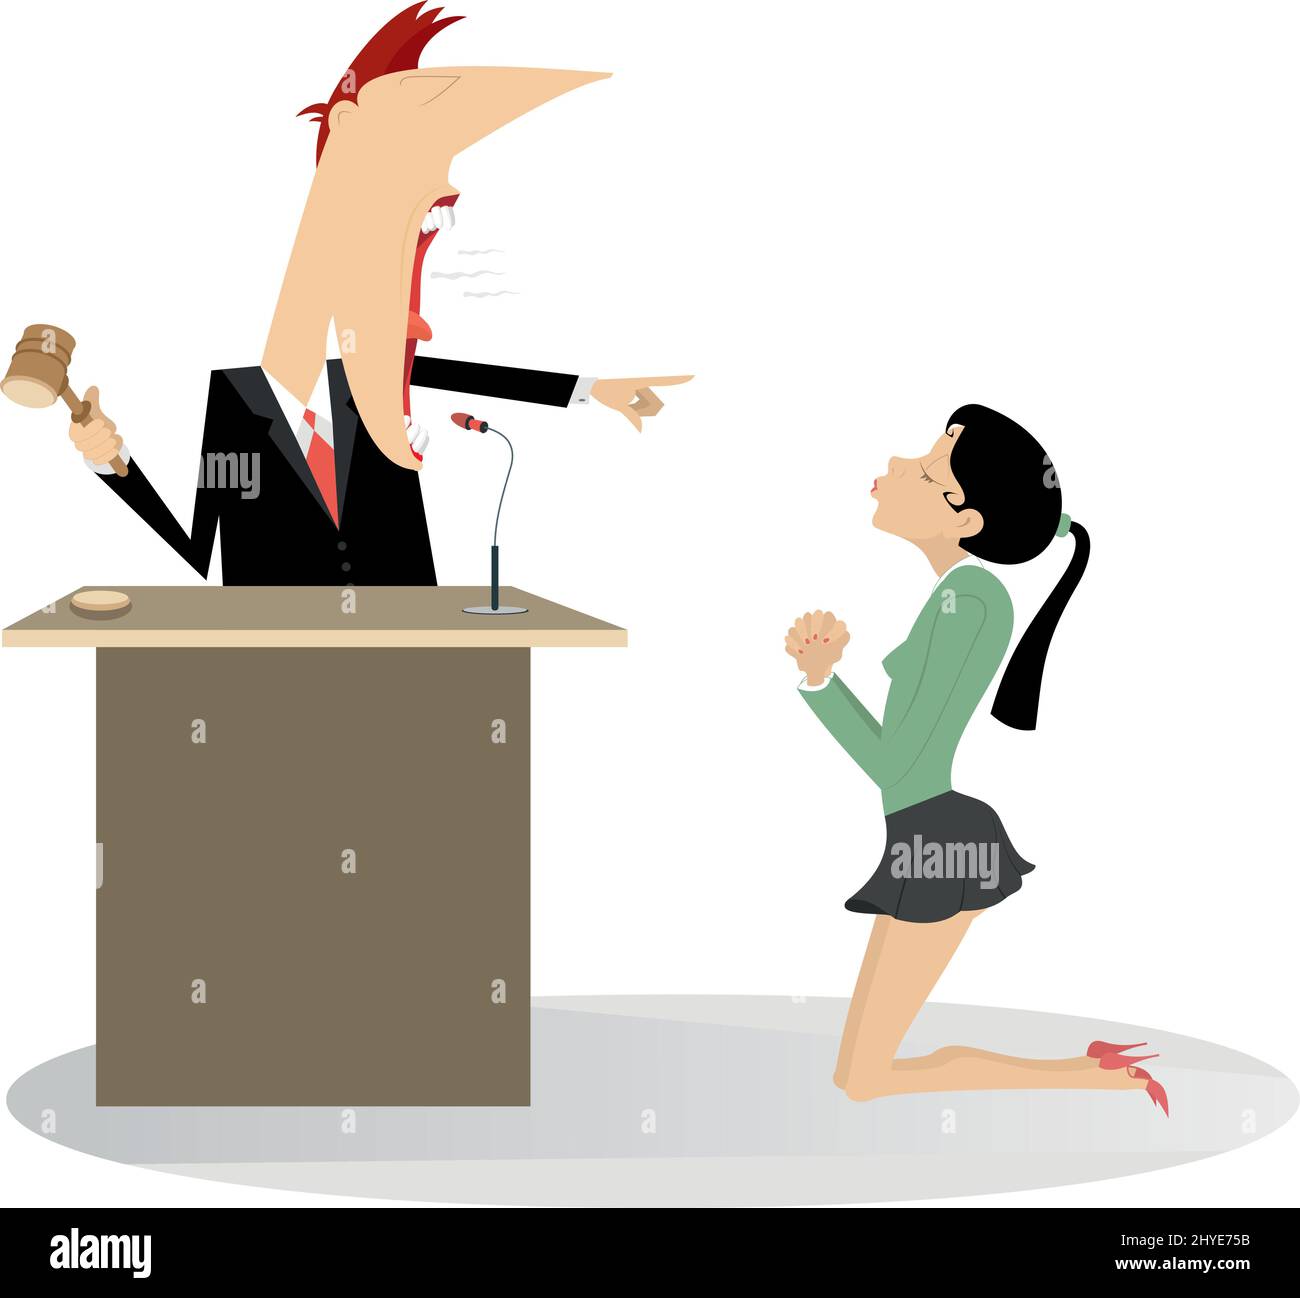 Judge court, judge and convicted woman illustration. Angry judge announces the sentence to a kneeling woman offender isolated on white background Stock Vector